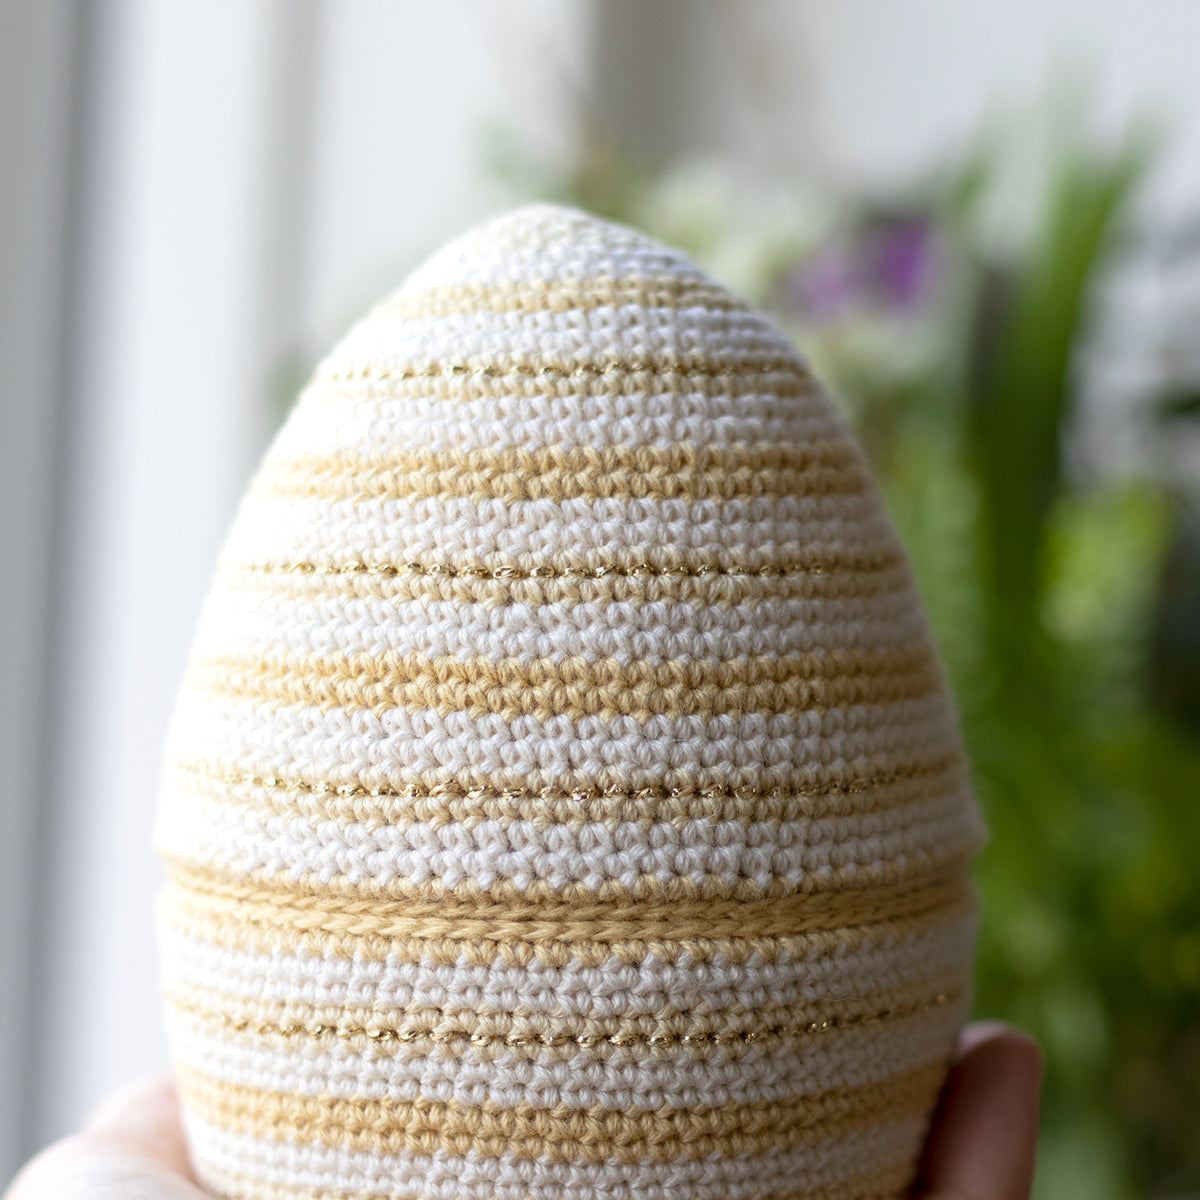 Two-piece Easter Egg no 2 - Crochet pattern